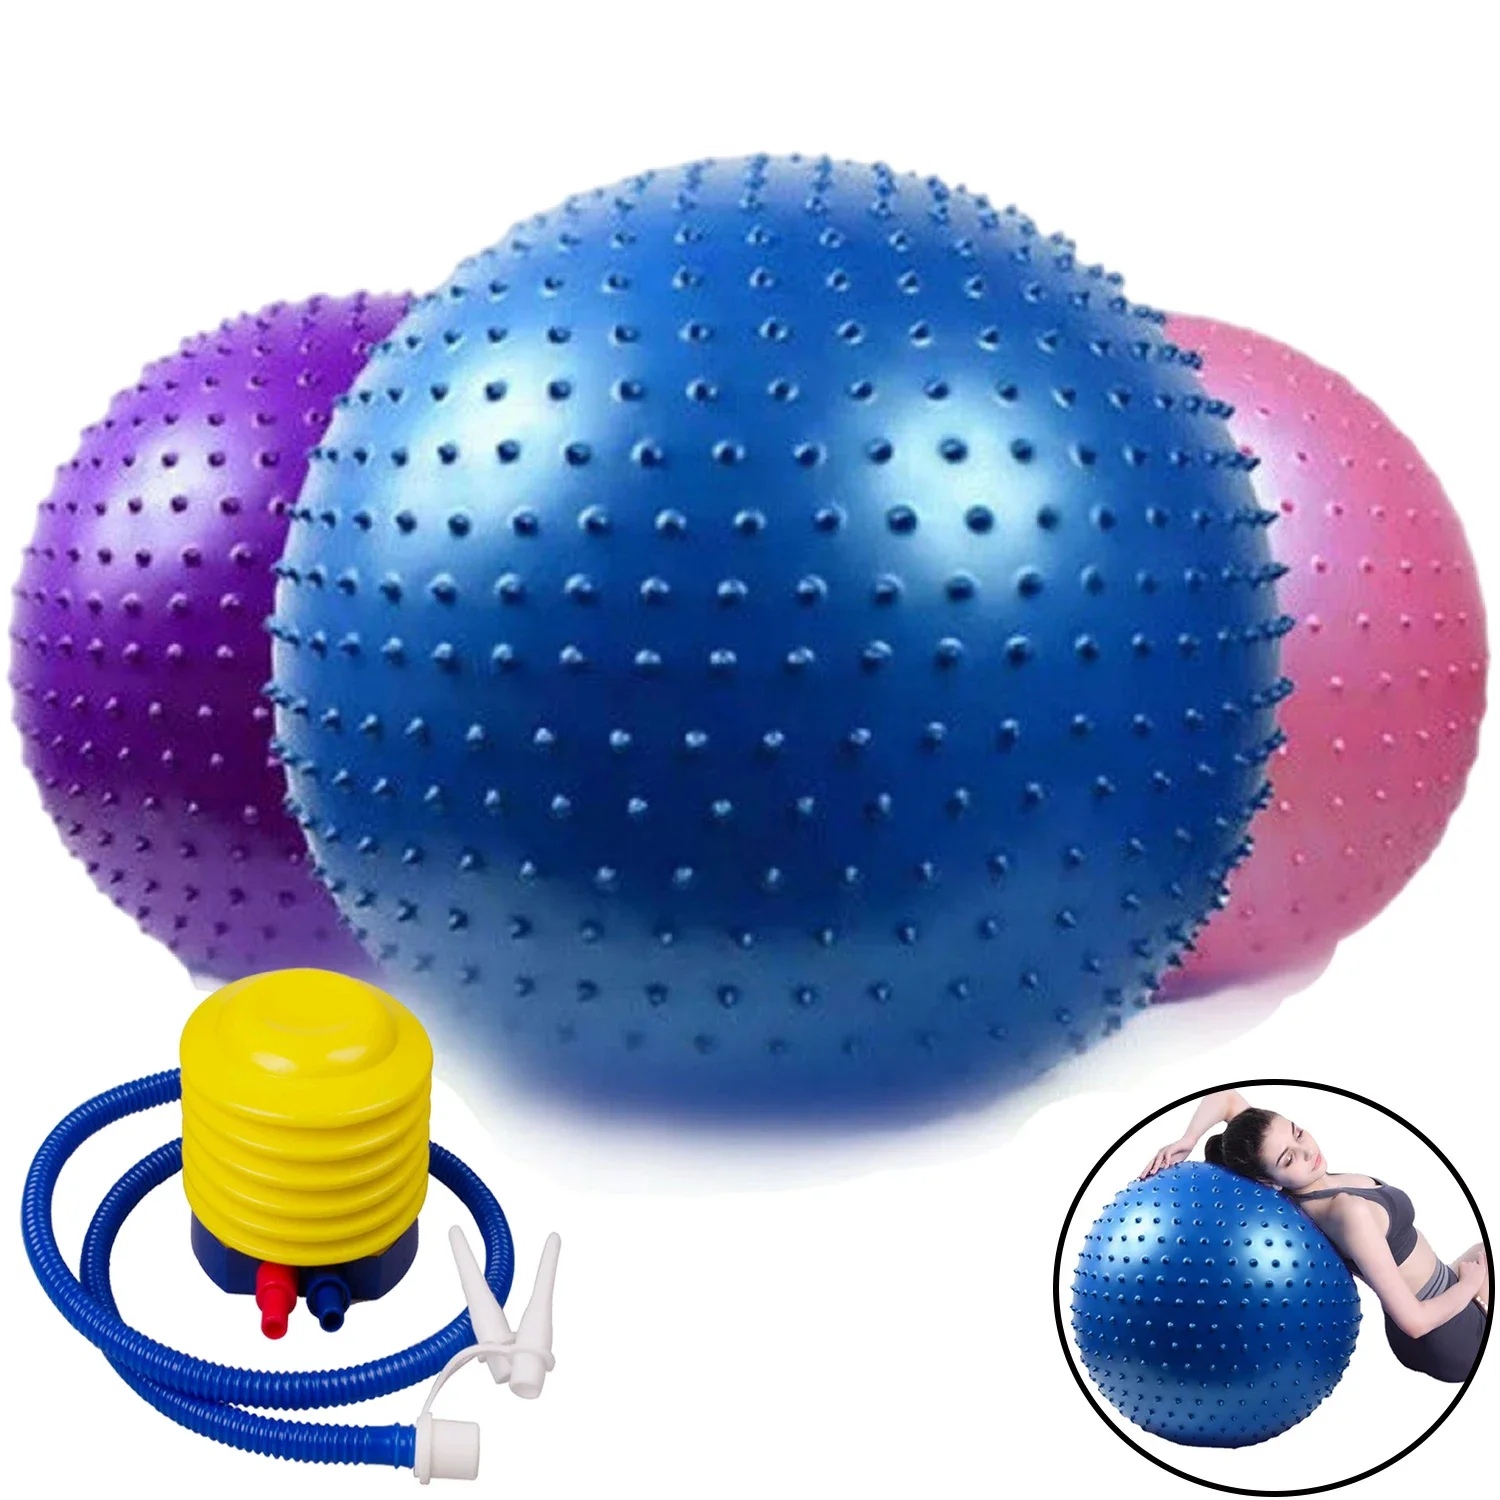 

Exercise Ball,Pilates Yoga Stability Anti-Burst Ball with Pump,With Massage Anti Slip Workout Balance Ball for Home,Gym,Pregnant